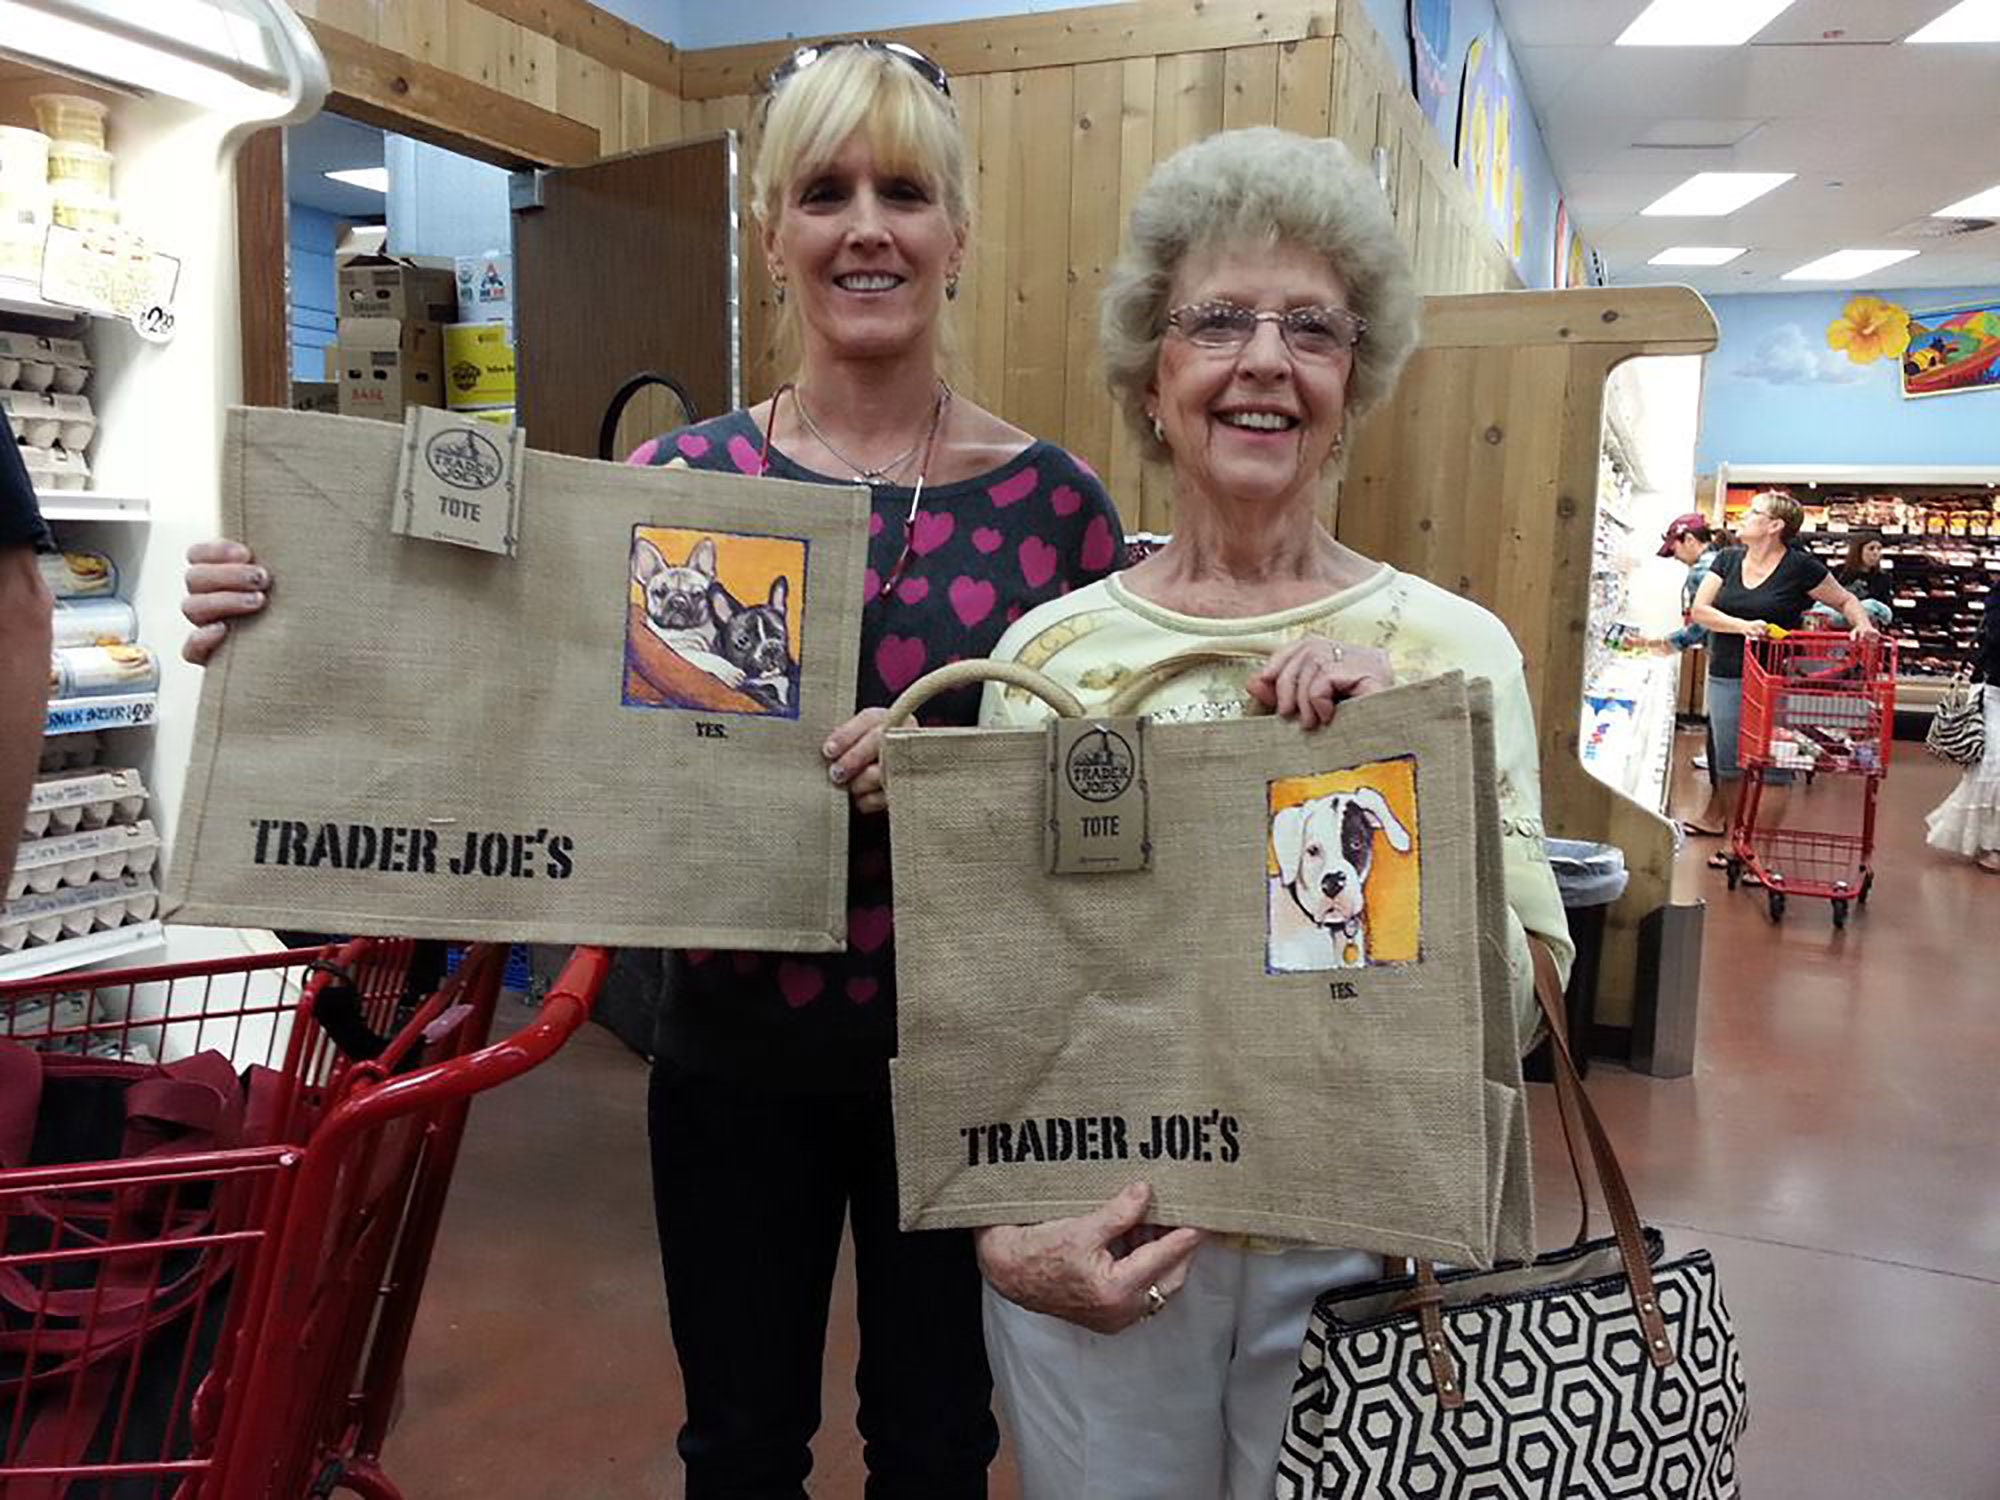 Details about   ⚡ Trader Joe's Reusable Jute Burlap Shopping Tote Bag NEW NWT FREE SHIPPING ❤️ 